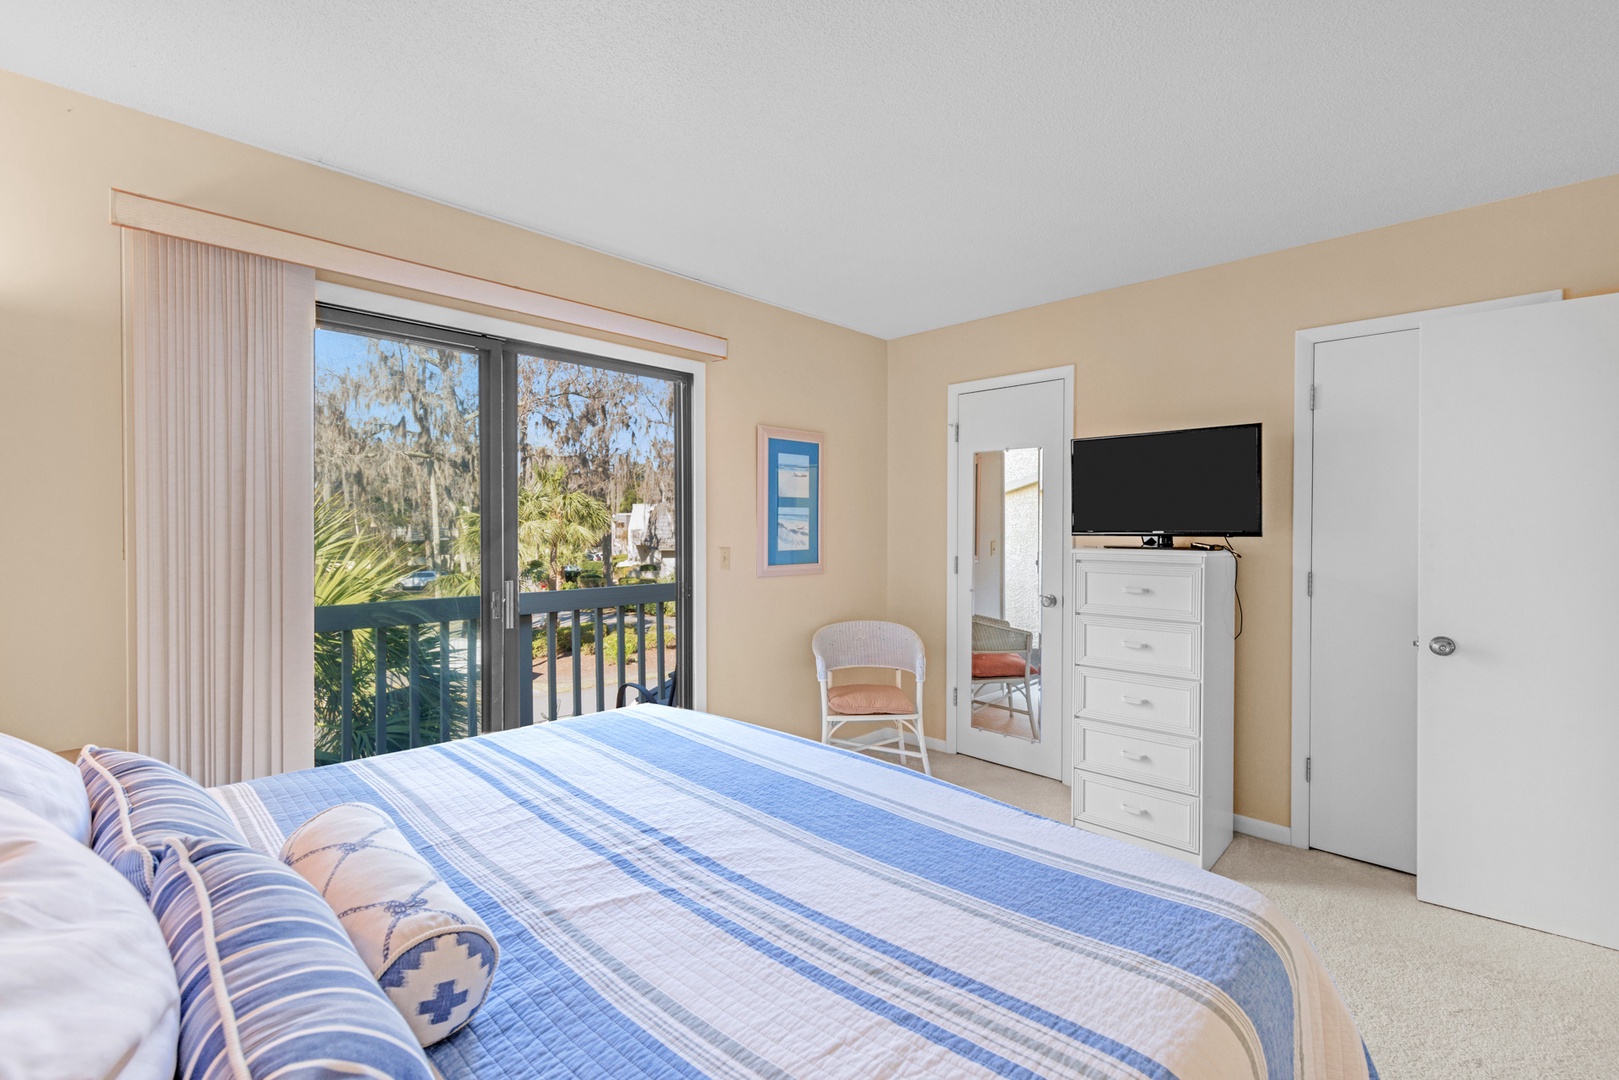 The regal king suite boasts a king bed, Smart TV & balcony access